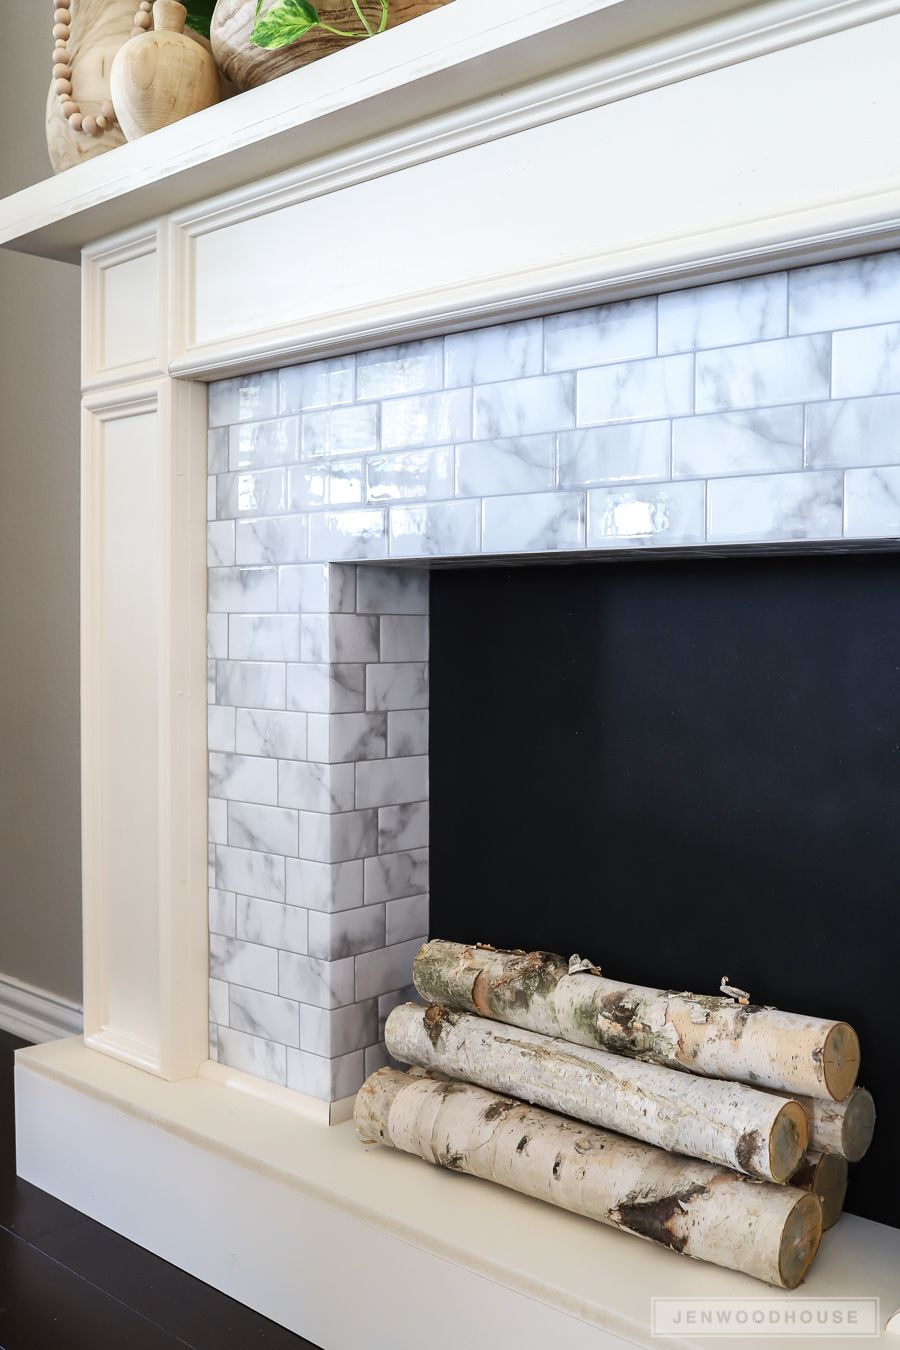 How to Make An Electric Fireplace Look Built In Inspirational How to Make A Diy Faux Fireplace Featuring Smart Tiles